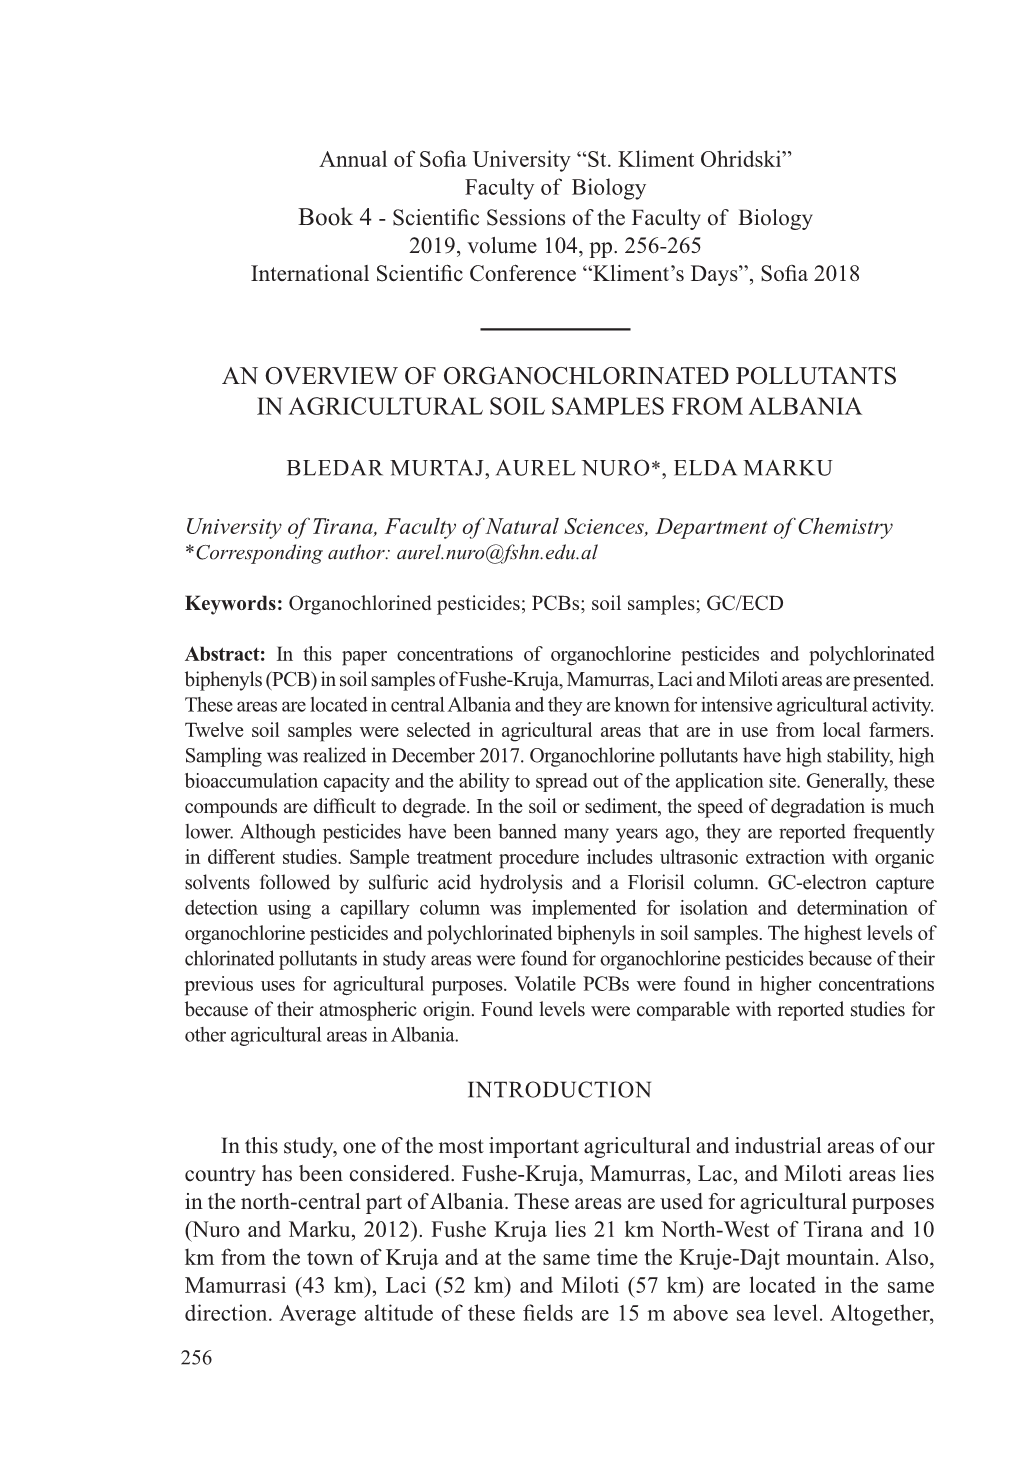 An Overview of Organochlorinated Pollutants in Agricultural Soil Samples from Albania